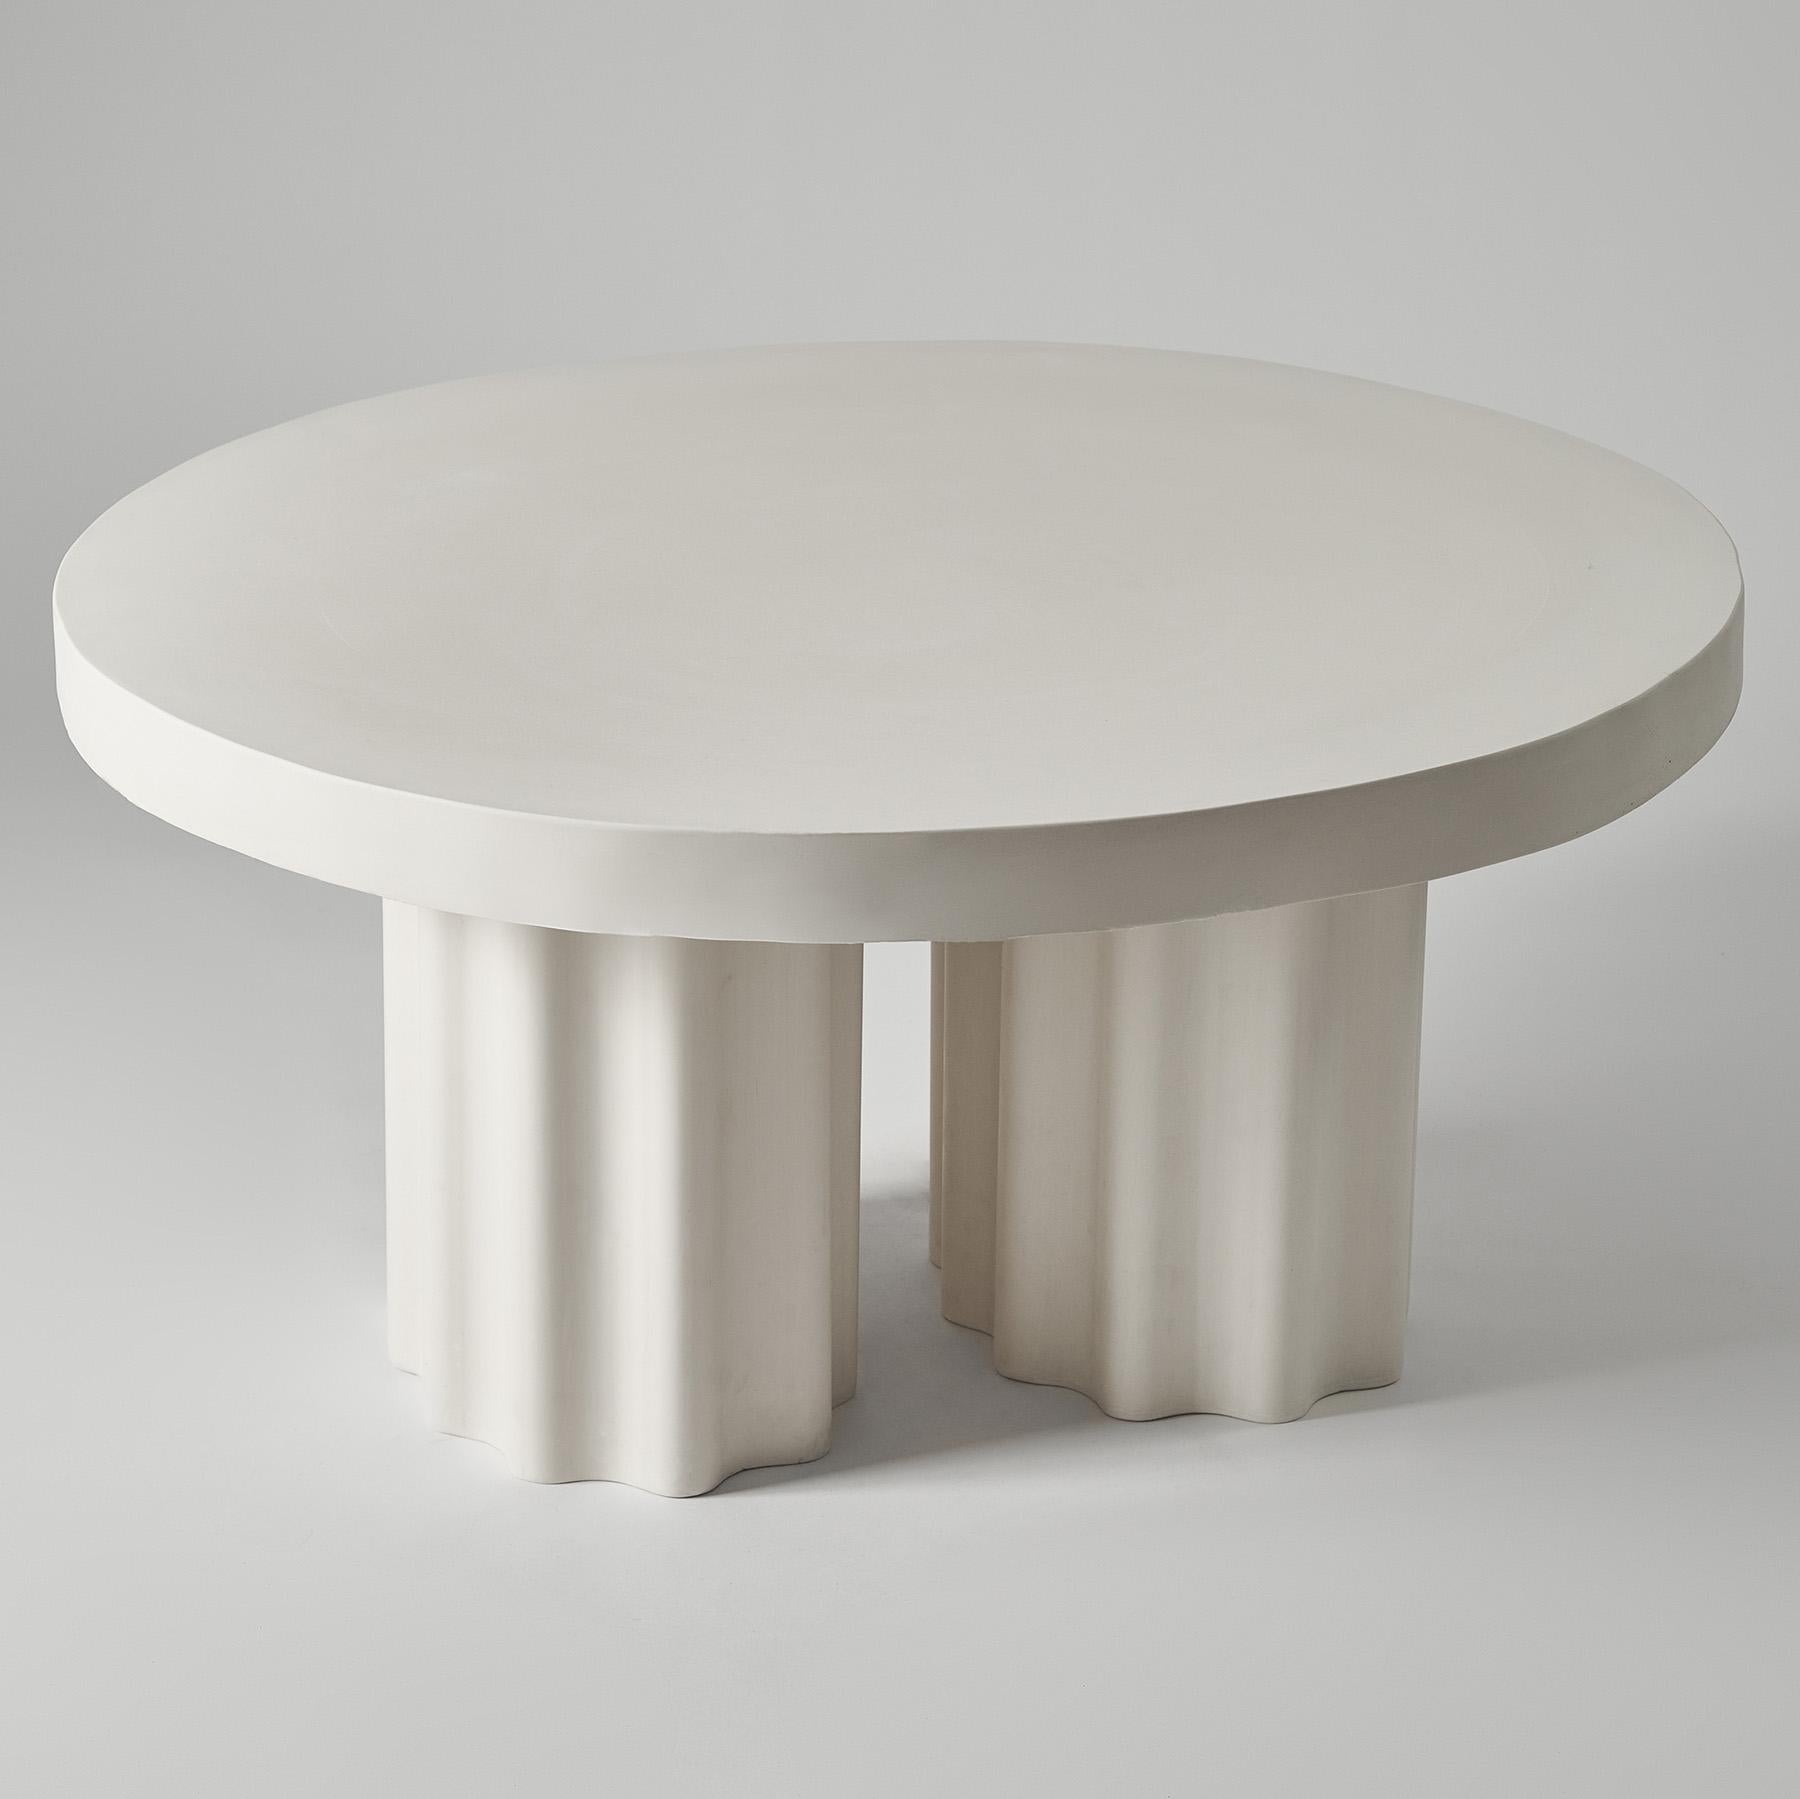 Flowing White 80 Coffee Table by Perler
Dimensions: Ø 80 x H 35 cm.
Materials: Jesmonite.
Weight: 35-40 kg.

Available in three diameters: Ø 80, 90 and 100 cm; and two different heights: 35 and 40 cm.  Please contact us.

This white, round coffee